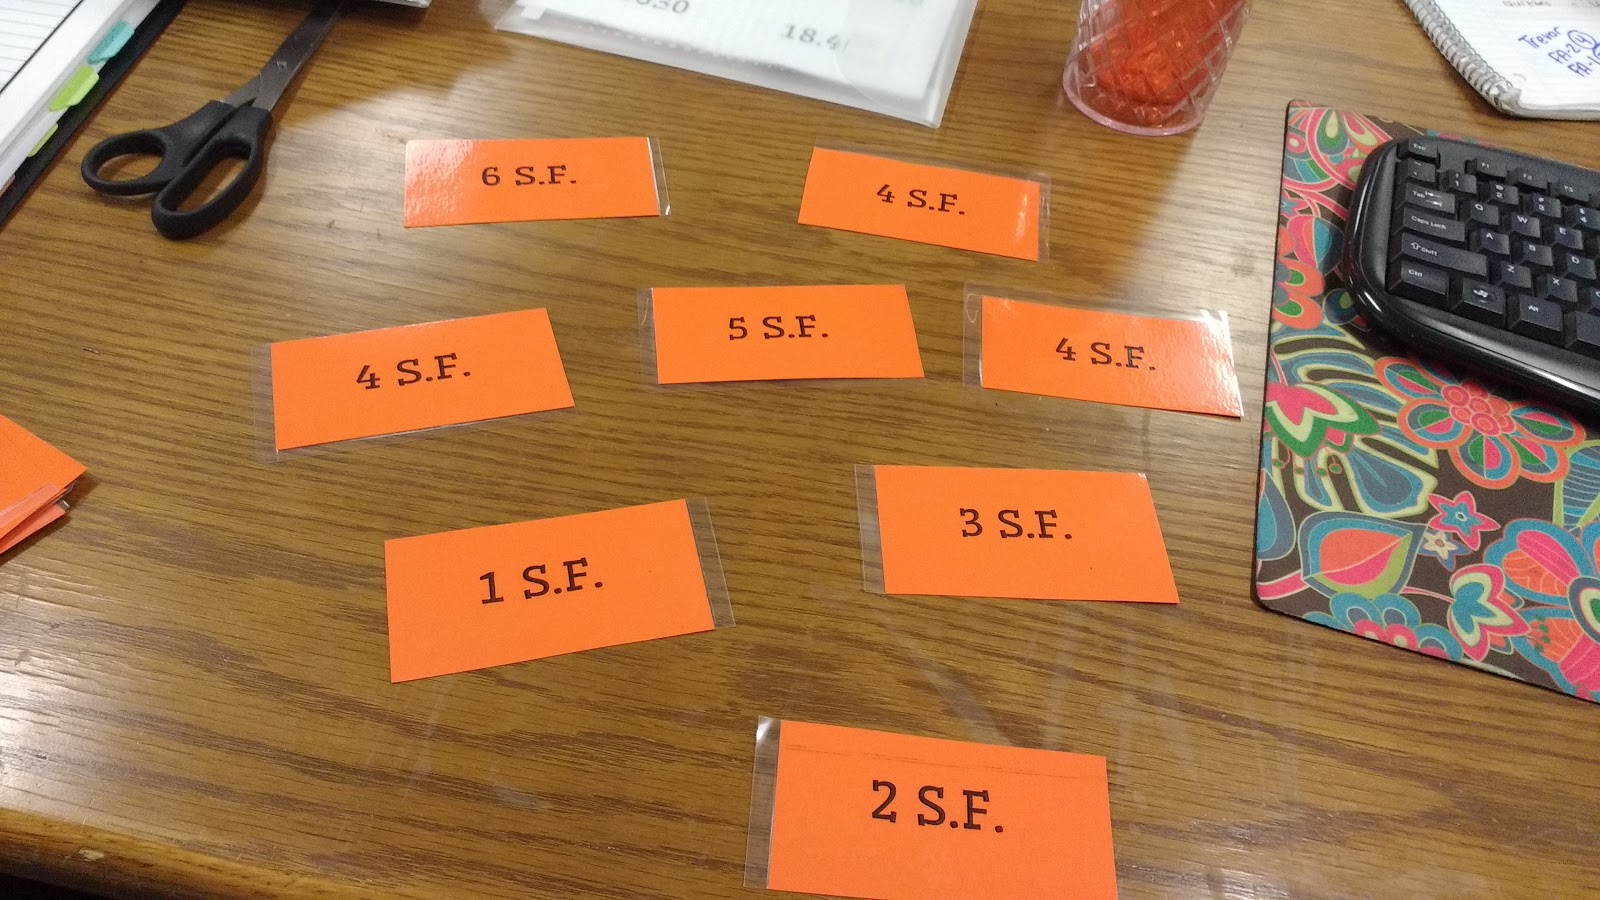 significant figures speed dating activity for physical science or chemistry classroom 